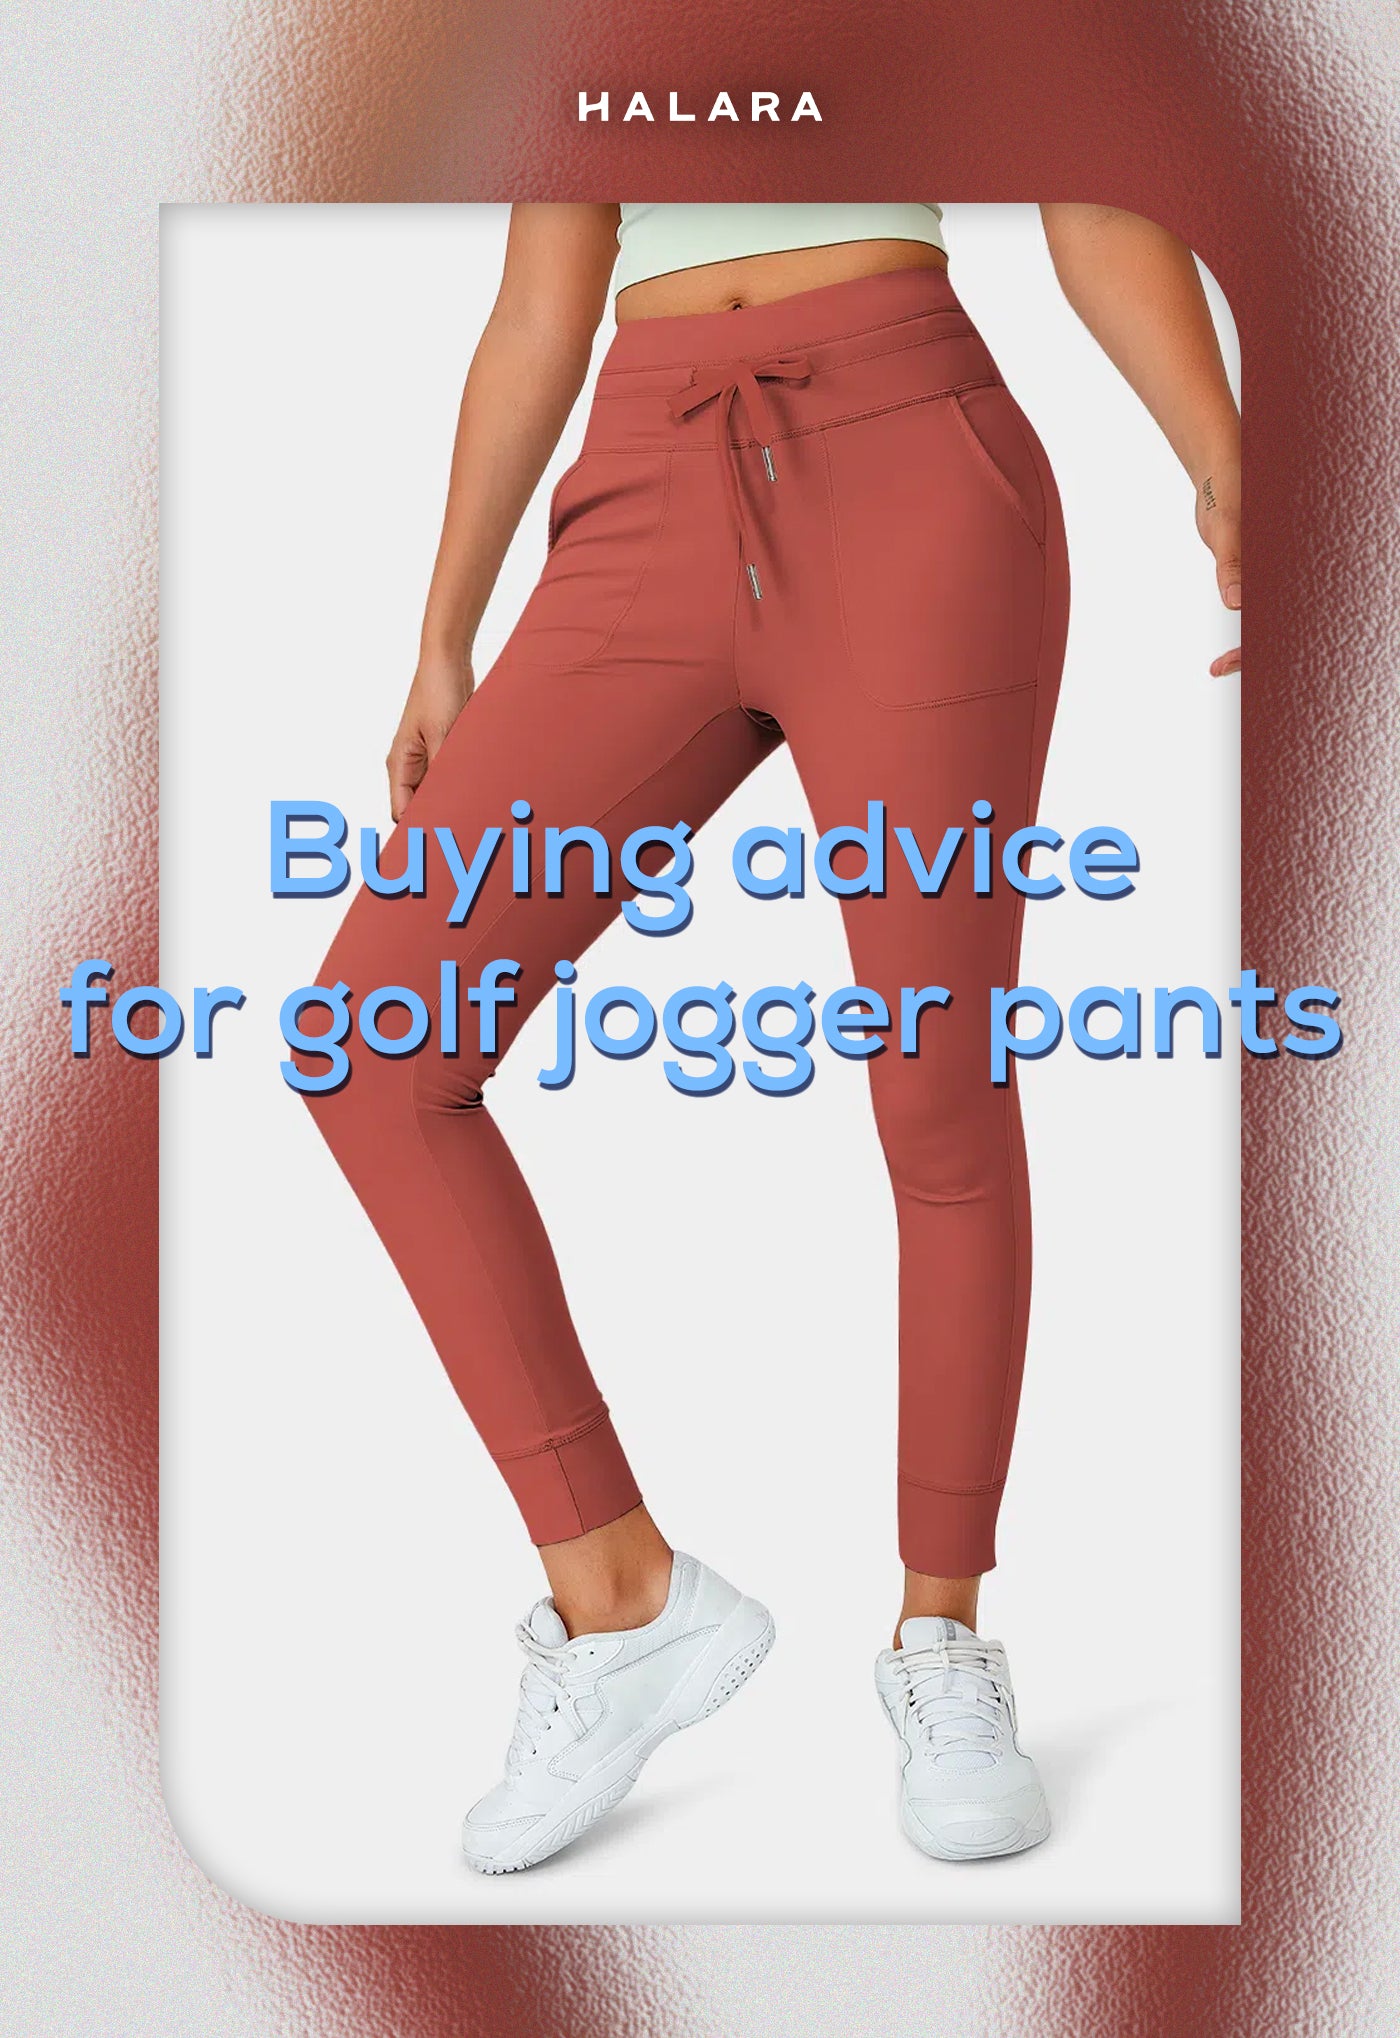 Selecting high waist yoga leggings as your next pair will have many